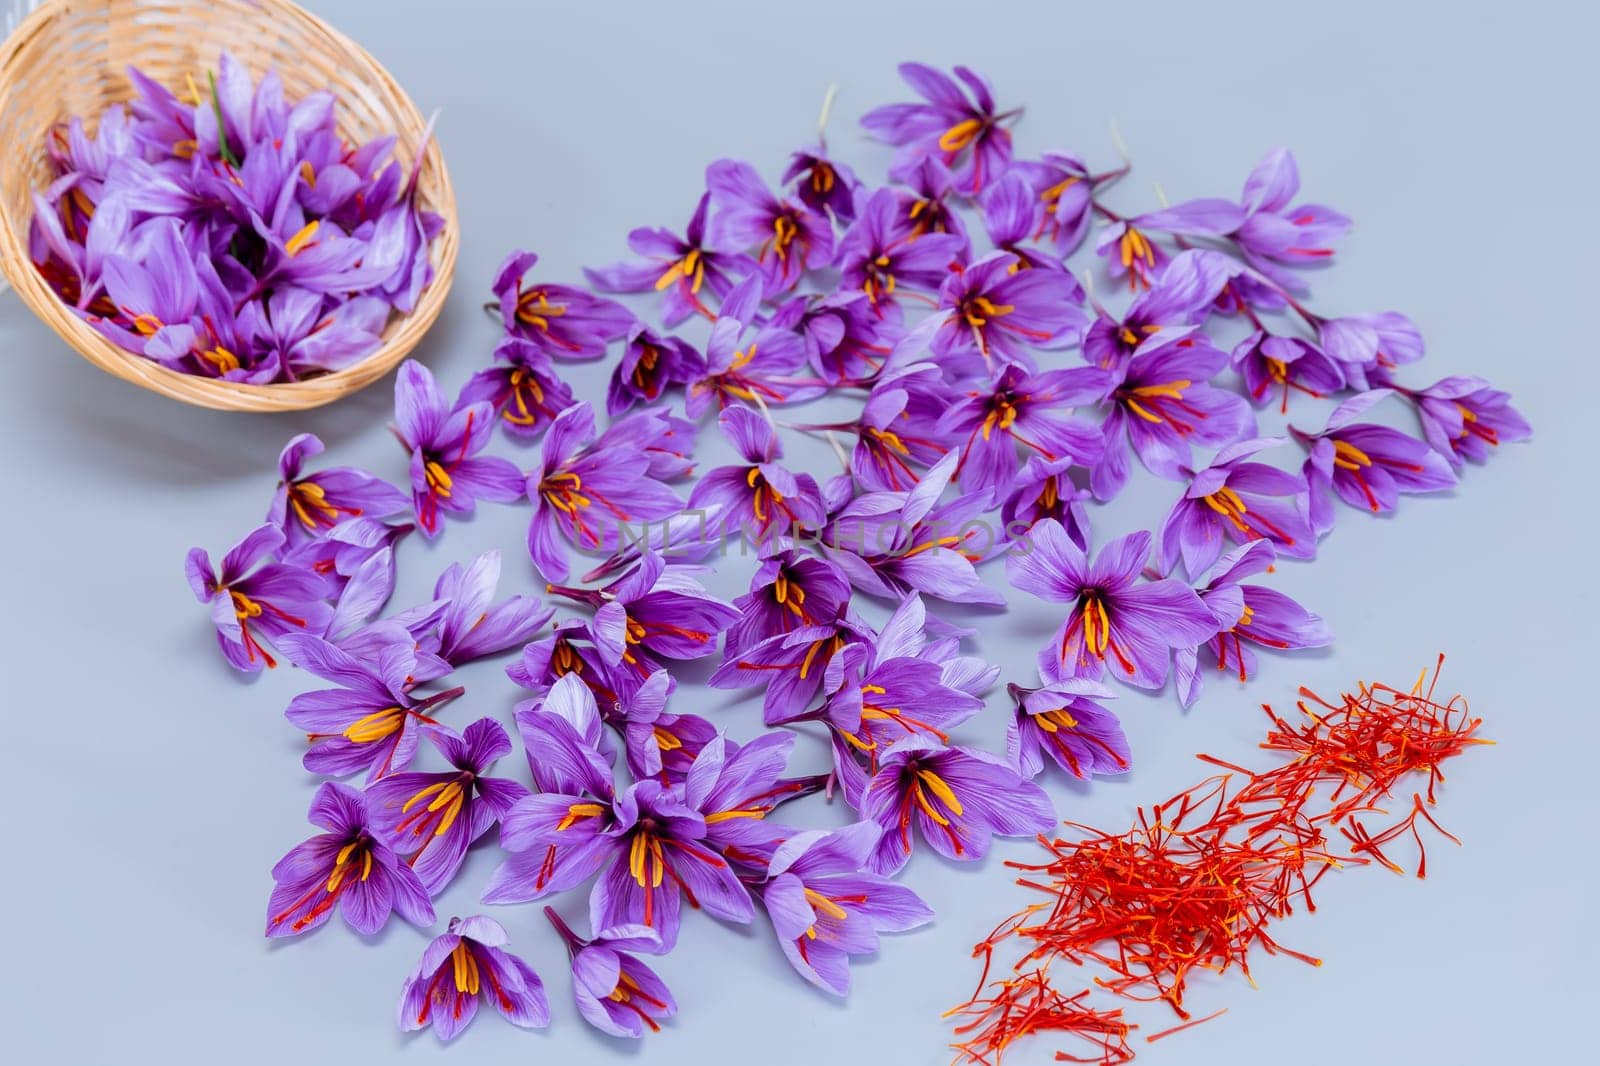 Crocuses and saffron stamens are lined up on a gray table. The saffron spice is used in cooking. Expensive spice.